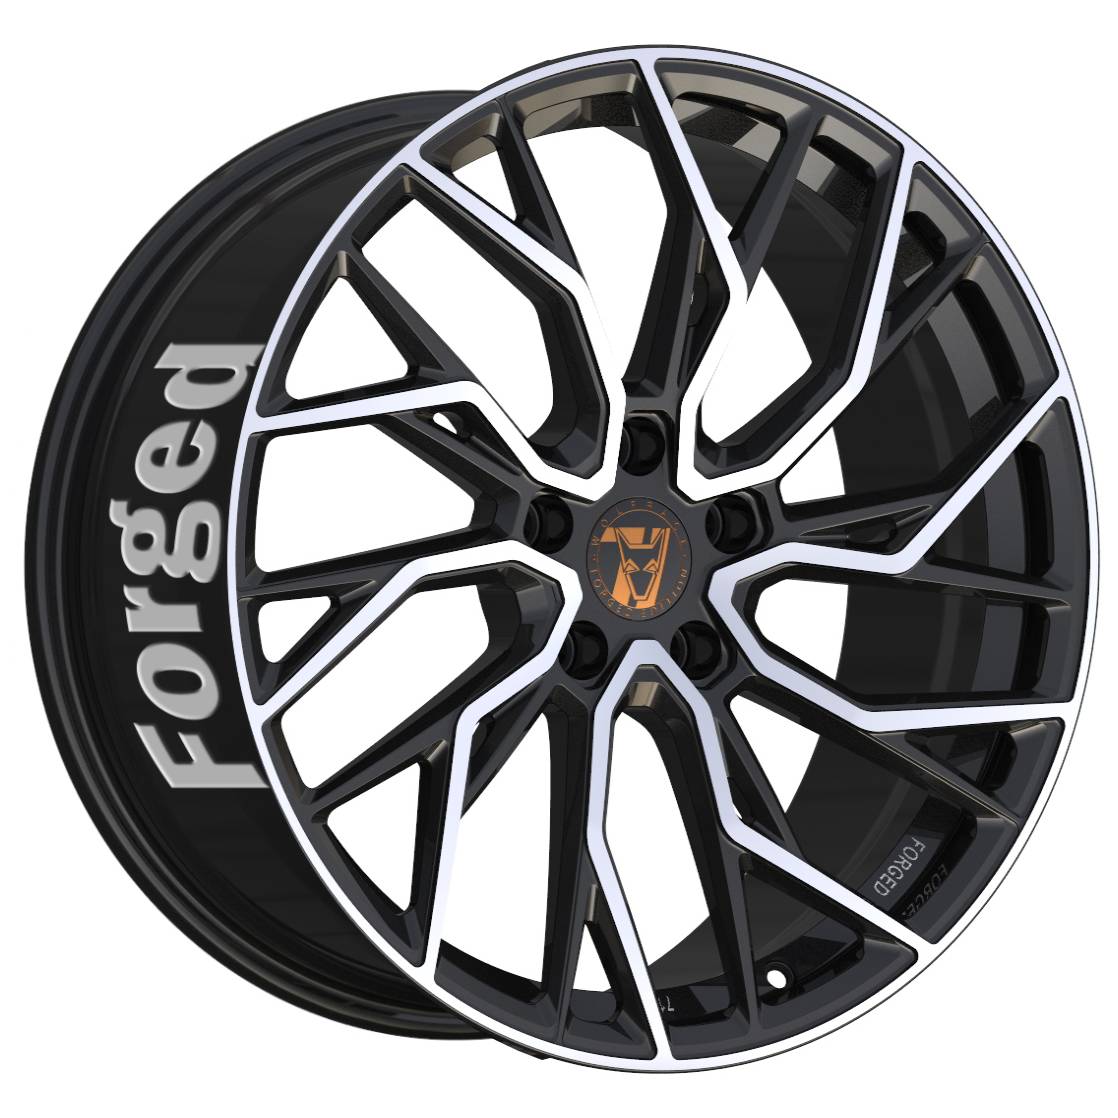 Demon Wheels 71 Forged Edition Voodoo Forged [9.5x24] -5x115- ET 45